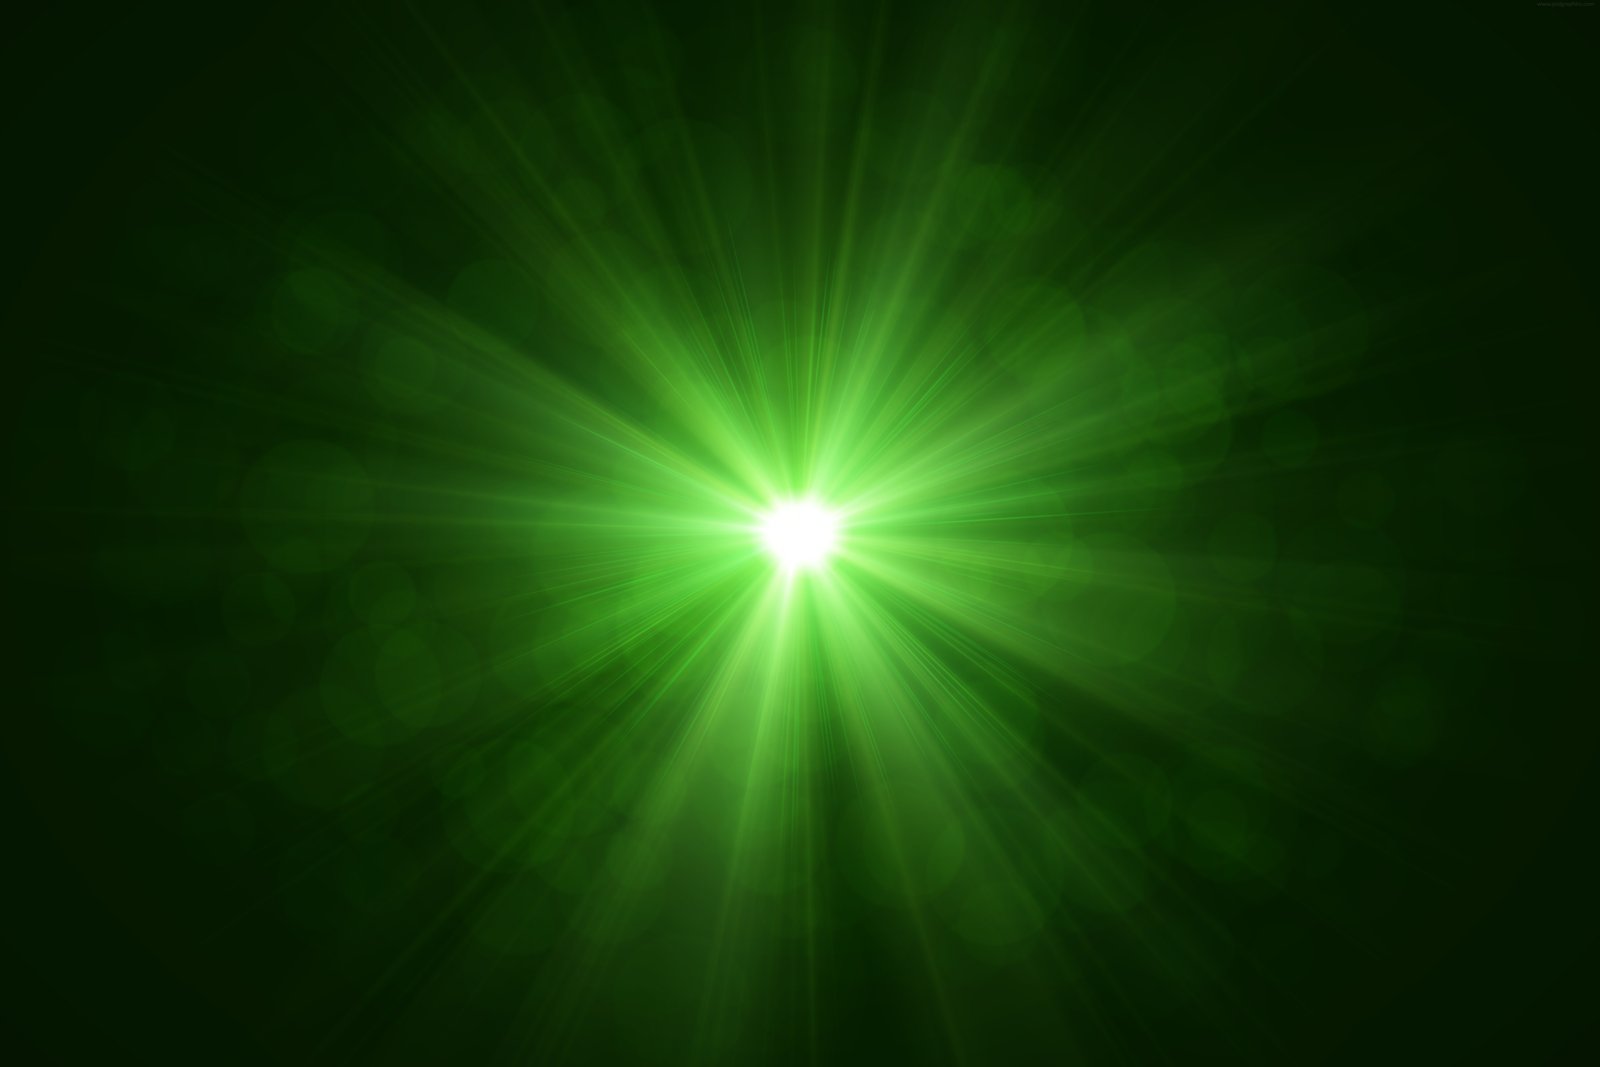 white and light green background